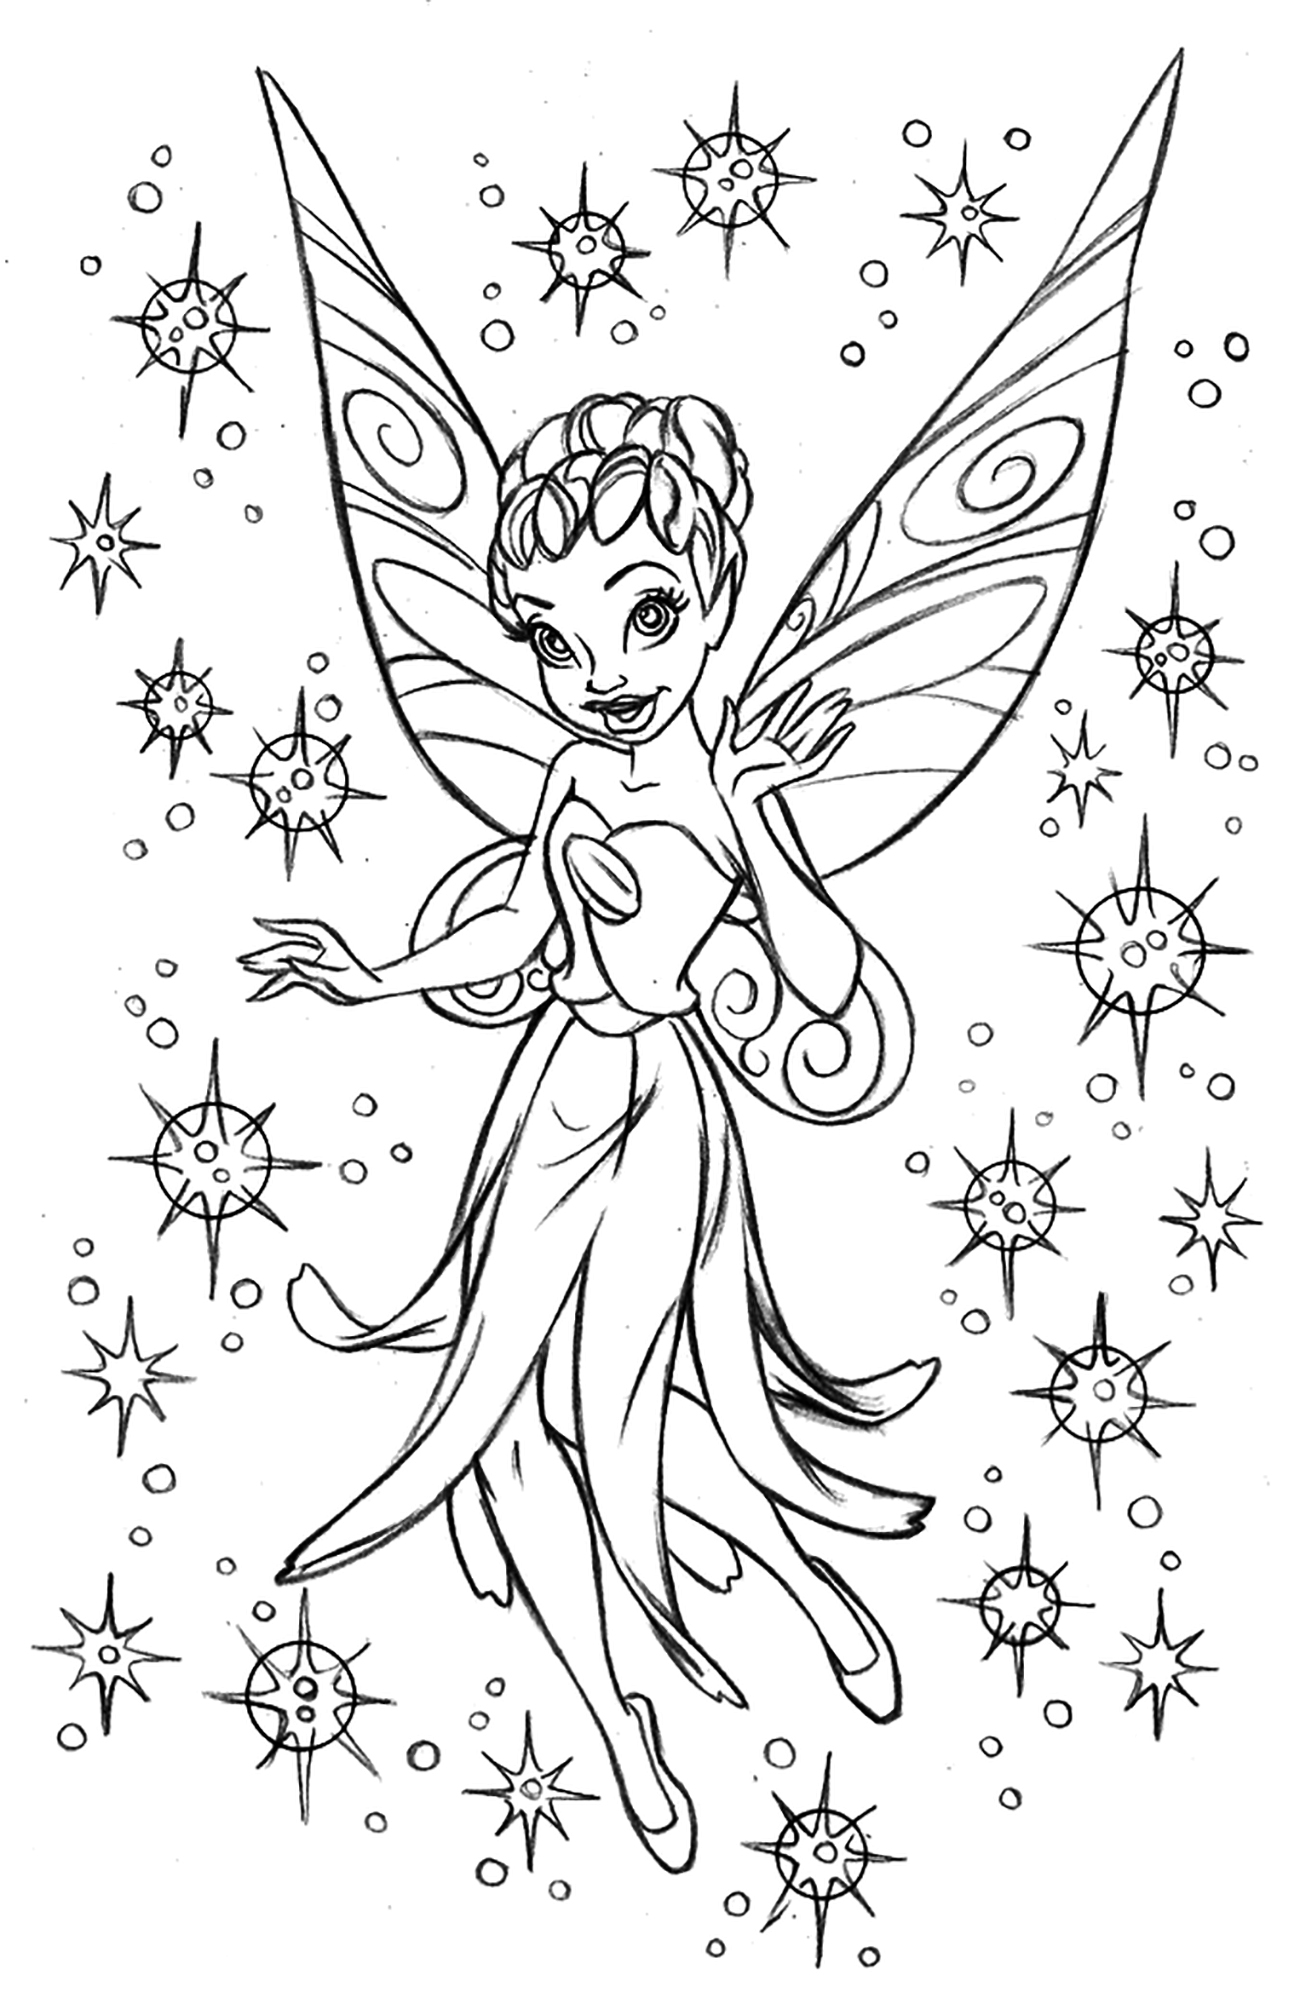 Disney's Tinckerbell fan art drawing, to print and color ! The prettiest fairy in the world :)